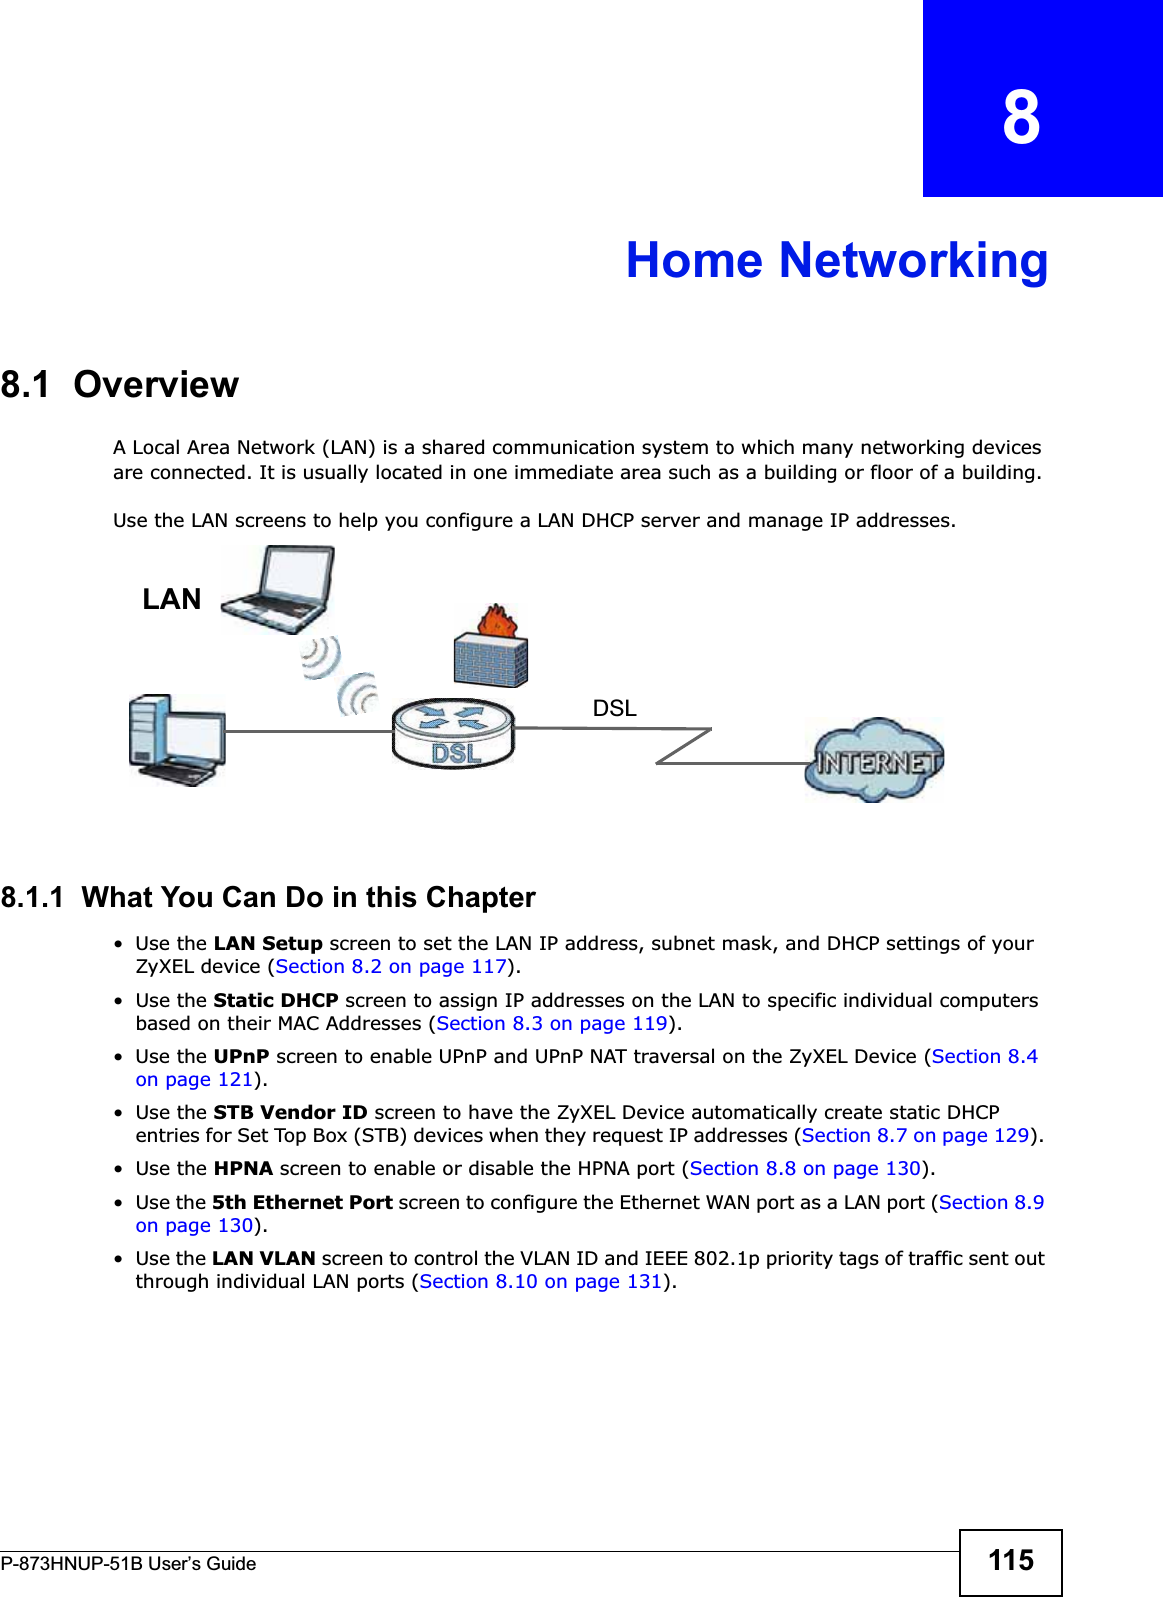 P-873HNUP-51B User’s Guide 115CHAPTER   8Home Networking8.1  OverviewA Local Area Network (LAN) is a shared communication system to which many networking devices are connected. It is usually located in one immediate area such as a building or floor of a building.Use the LAN screens to help you configure a LAN DHCP server and manage IP addresses.8.1.1  What You Can Do in this Chapter•Use the LAN Setup screen to set the LAN IP address, subnet mask, and DHCP settings of your ZyXEL device (Section 8.2 on page 117).•Use the Static DHCP screen to assign IP addresses on the LAN to specific individual computers based on their MAC Addresses (Section 8.3 on page 119). •Use the UPnP screen to enable UPnP and UPnP NAT traversal on the ZyXEL Device (Section 8.4 on page 121).•Use the STB Vendor ID screen to have the ZyXEL Device automatically create static DHCP entries for Set Top Box (STB) devices when they request IP addresses (Section 8.7 on page 129).•Use the HPNA screen to enable or disable the HPNA port (Section 8.8 on page 130).•Use the 5th Ethernet Port screen to configure the Ethernet WAN port as a LAN port (Section 8.9 on page 130).•Use the LAN VLAN screen to control the VLAN ID and IEEE 802.1p priority tags of traffic sent out through individual LAN ports (Section 8.10 on page 131).DSLLAN